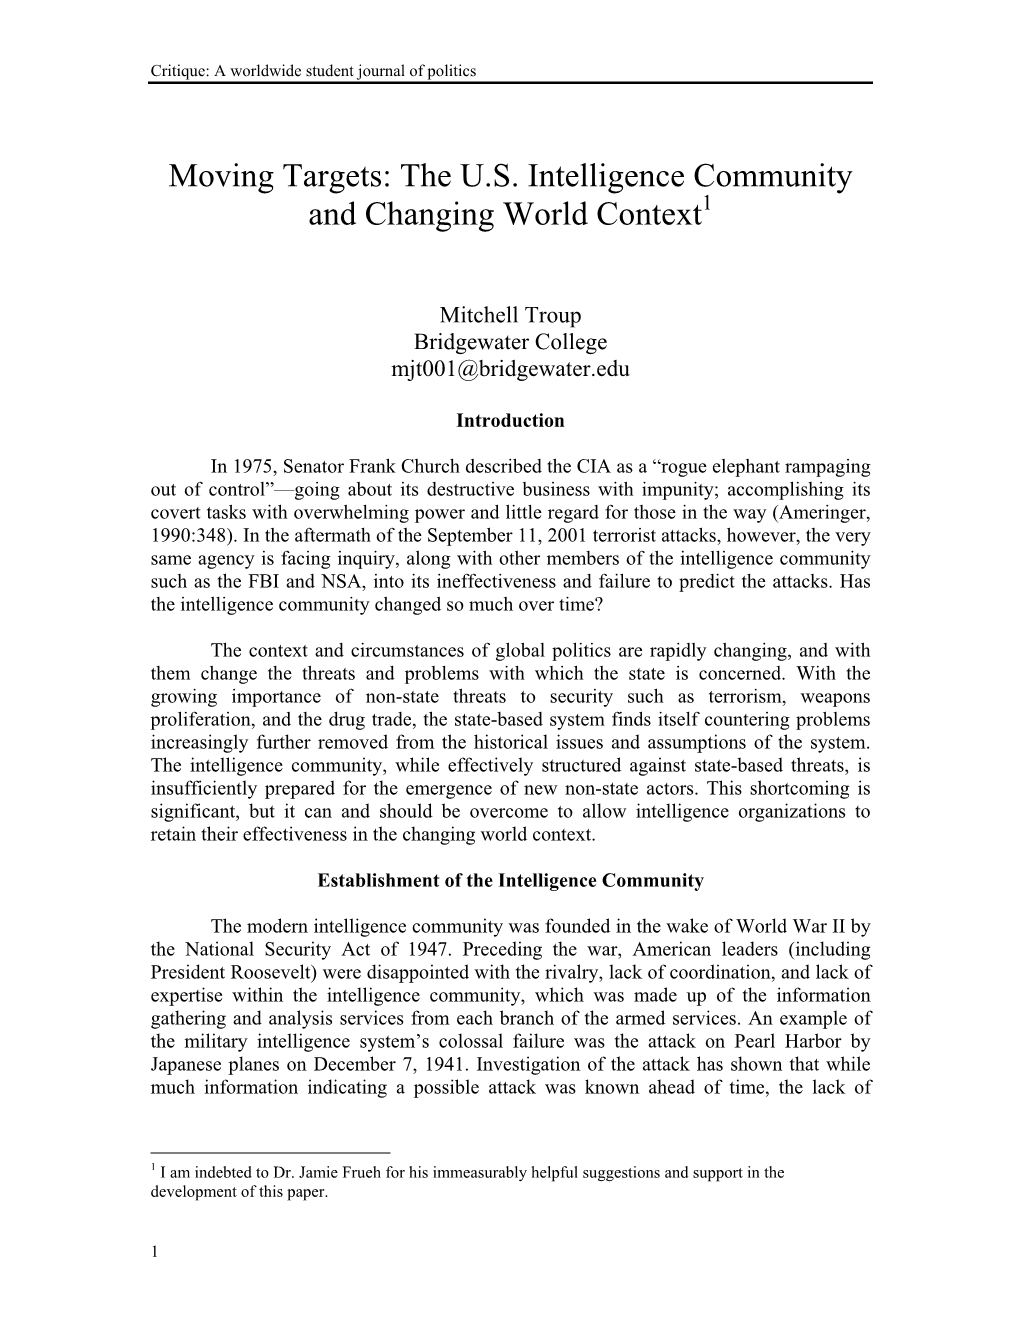 The US Intelligence Community and Changing World Context